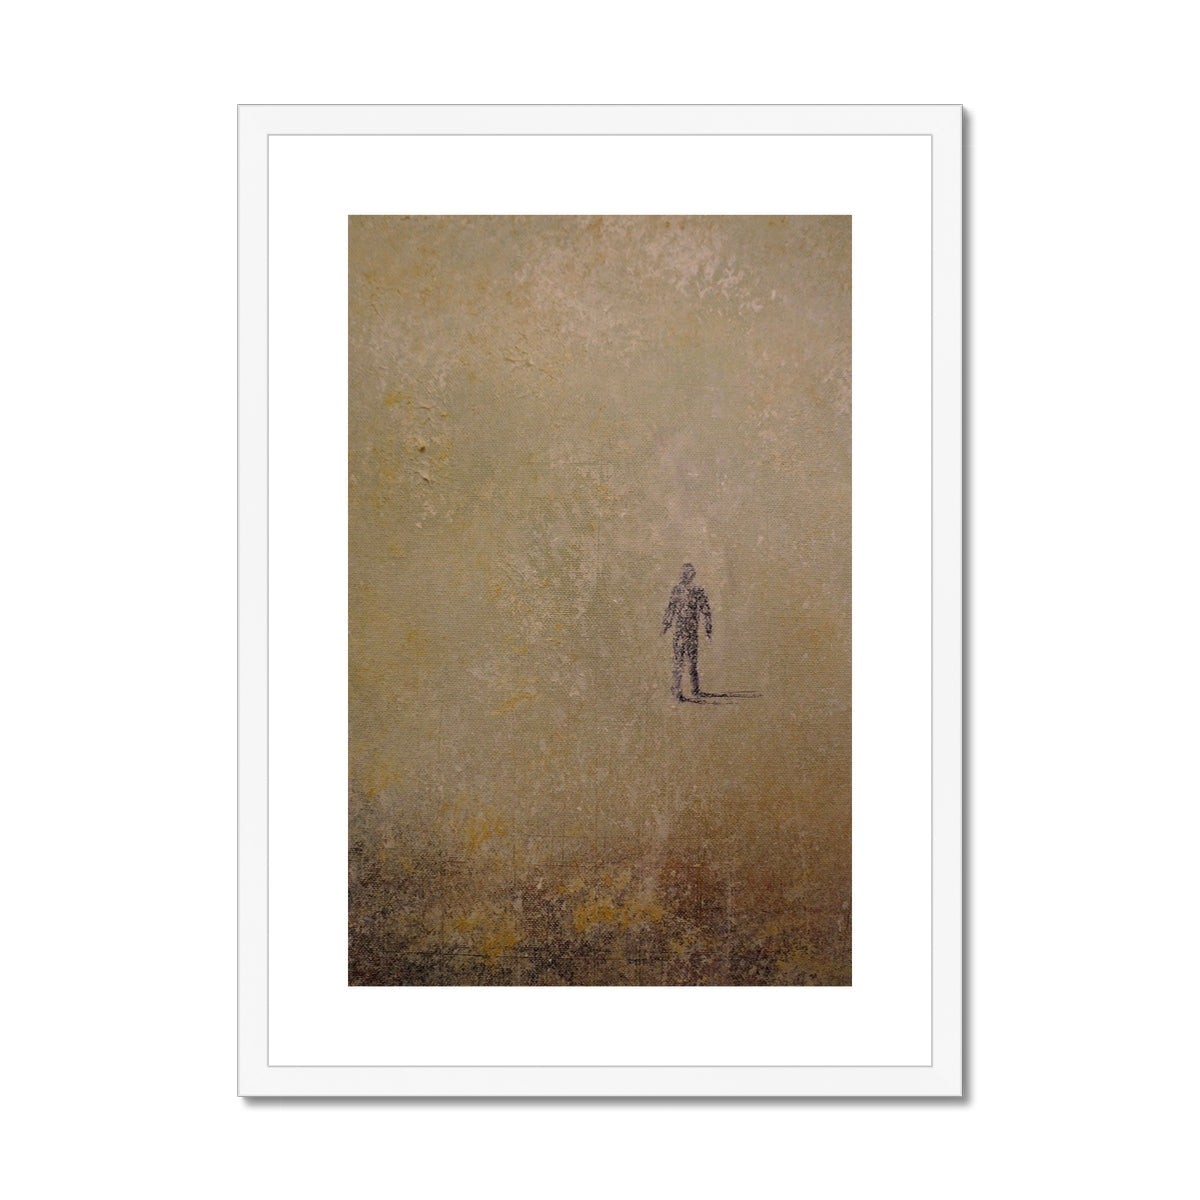 Into The Munro Mist Painting | Framed & Mounted Prints From Scotland-Framed & Mounted Prints-Abstract & Impressionistic Art Gallery-A2 Portrait-White Frame-Paintings, Prints, Homeware, Art Gifts From Scotland By Scottish Artist Kevin Hunter